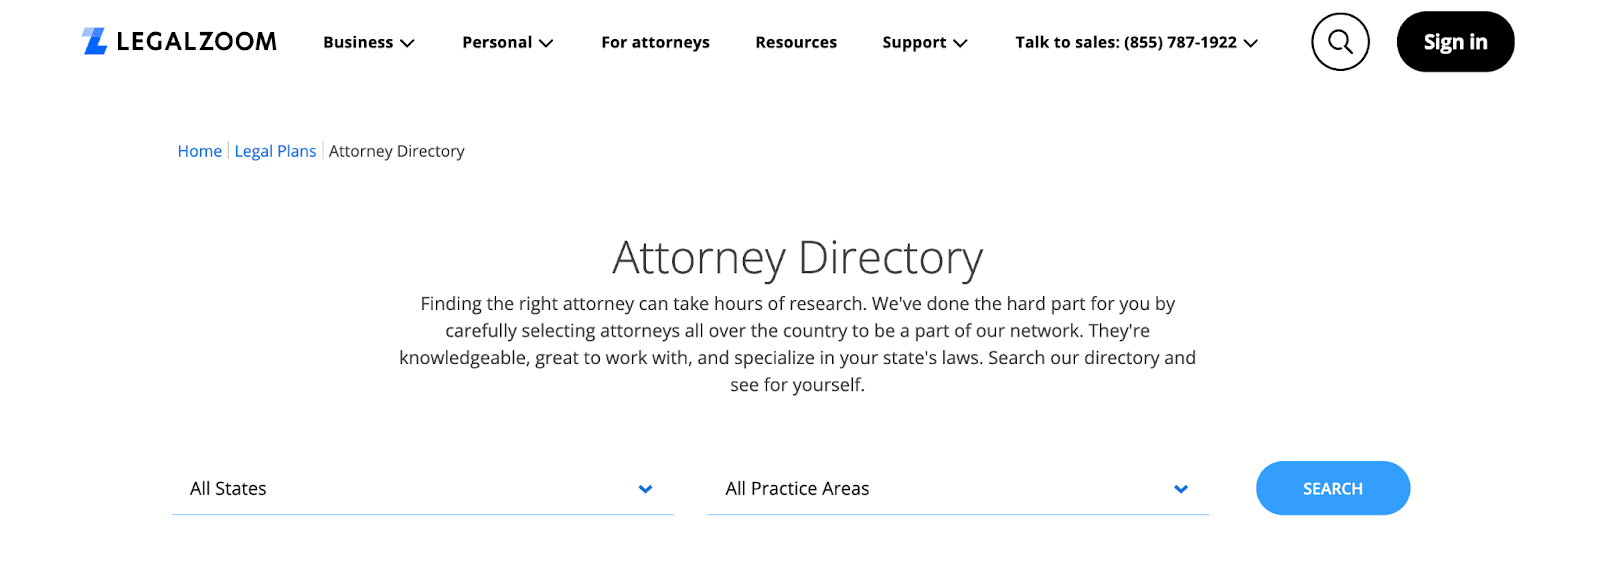 Search LegalZoom's attorney directory by state and practice area. 